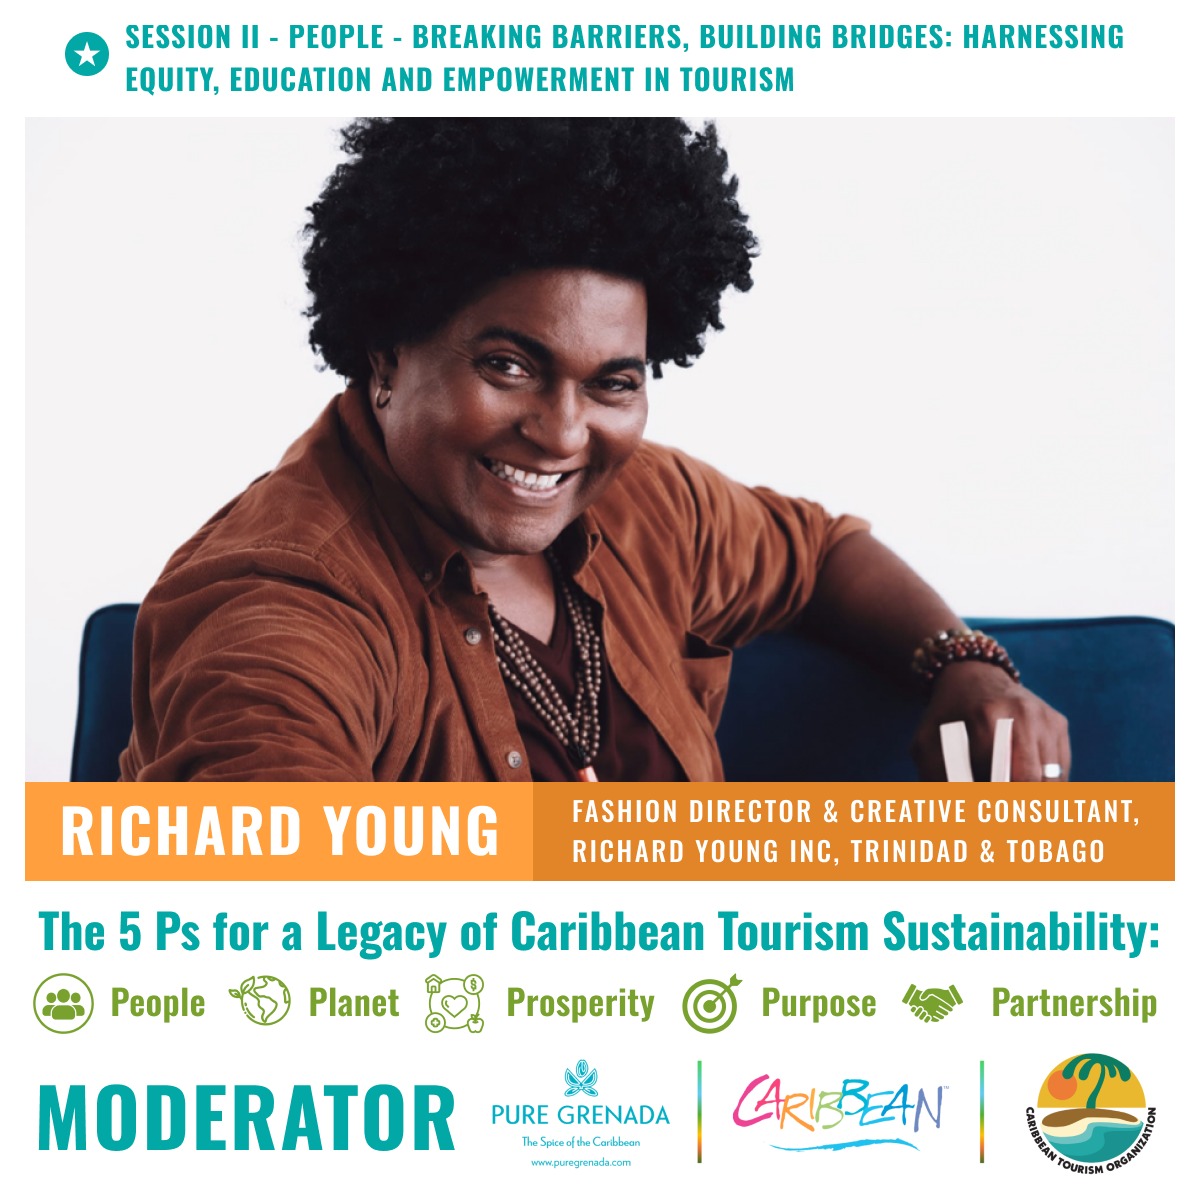 Creative director, producer, copywriter, and prolific impresario, Richard Young will moderate our “#People: Breaking Barriers, Building Bridges: Harnessing Equity, Education and Empowerment in Tourism” general session on Monday, April 22, at #STC2024. caribbeanstc.com/session/people/